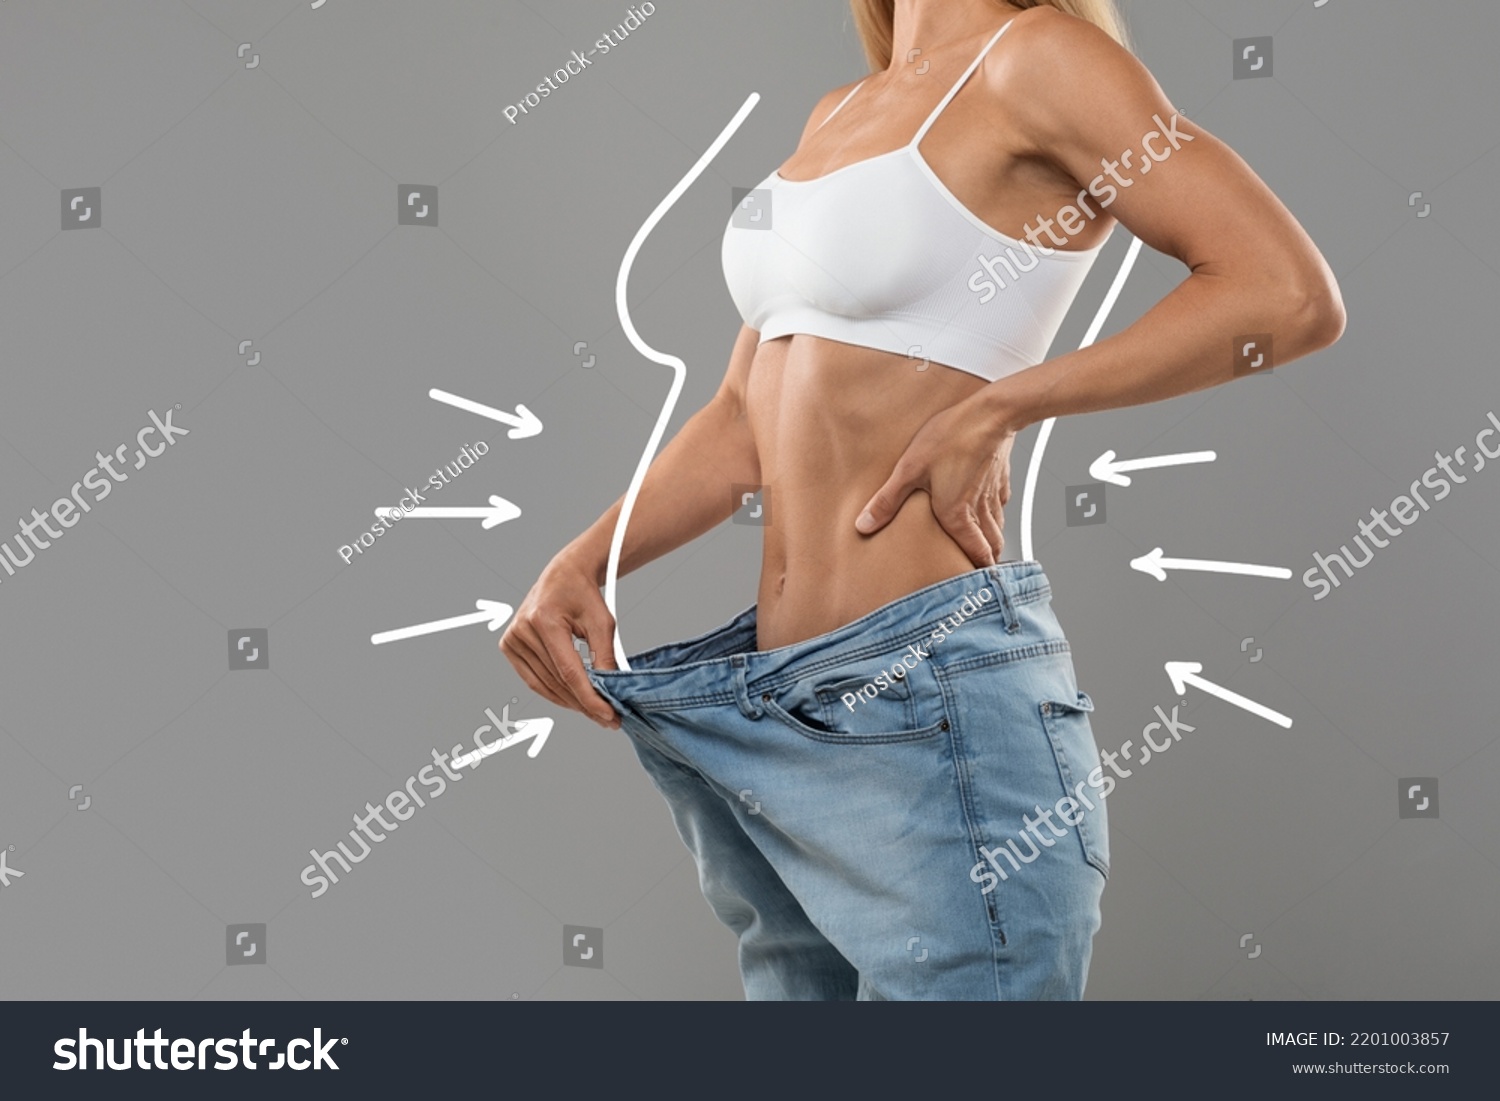 Young Slim Female Pulling Big Jeans And Showing Result Of Weight Loss With Drawn Silhouette Outlines And Arrows, Unrecognizable Sporty Woman In Oversized Clothes Demonstrating Body After Slimming #2201003857